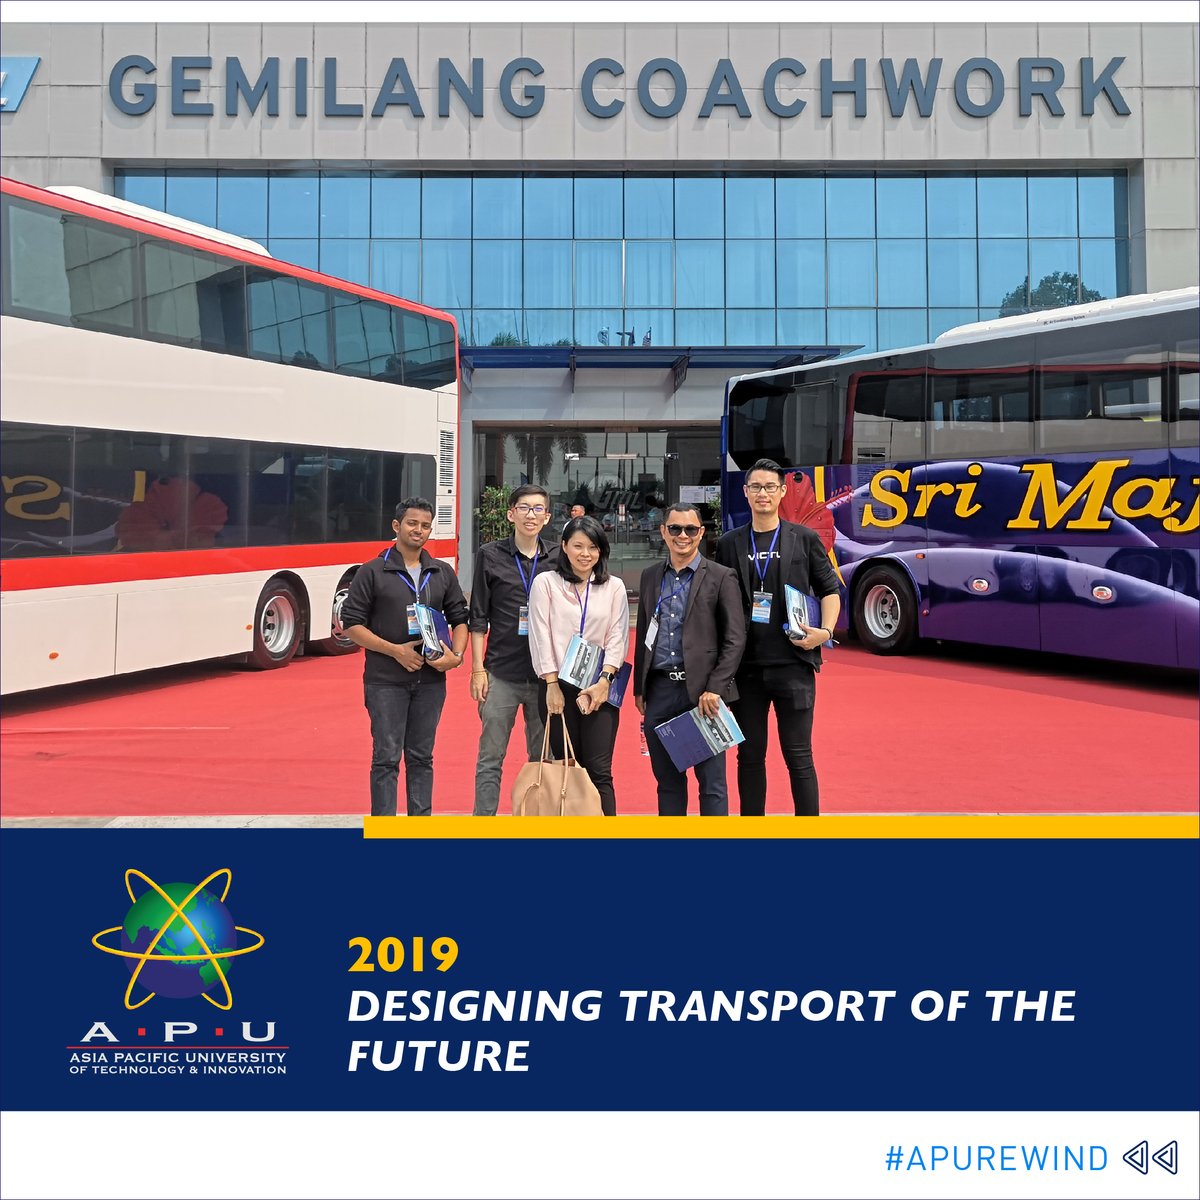 2019 - Students from our School of Media, Arts, & Design clinched 1st & 3rd place at the GML Bus Body & Interior Design Competition, held in conjunction with Gemilang Coachwork's 30th Anniversary to foster talent in bus design, focusing on aesthetics and functionality. #APURewind